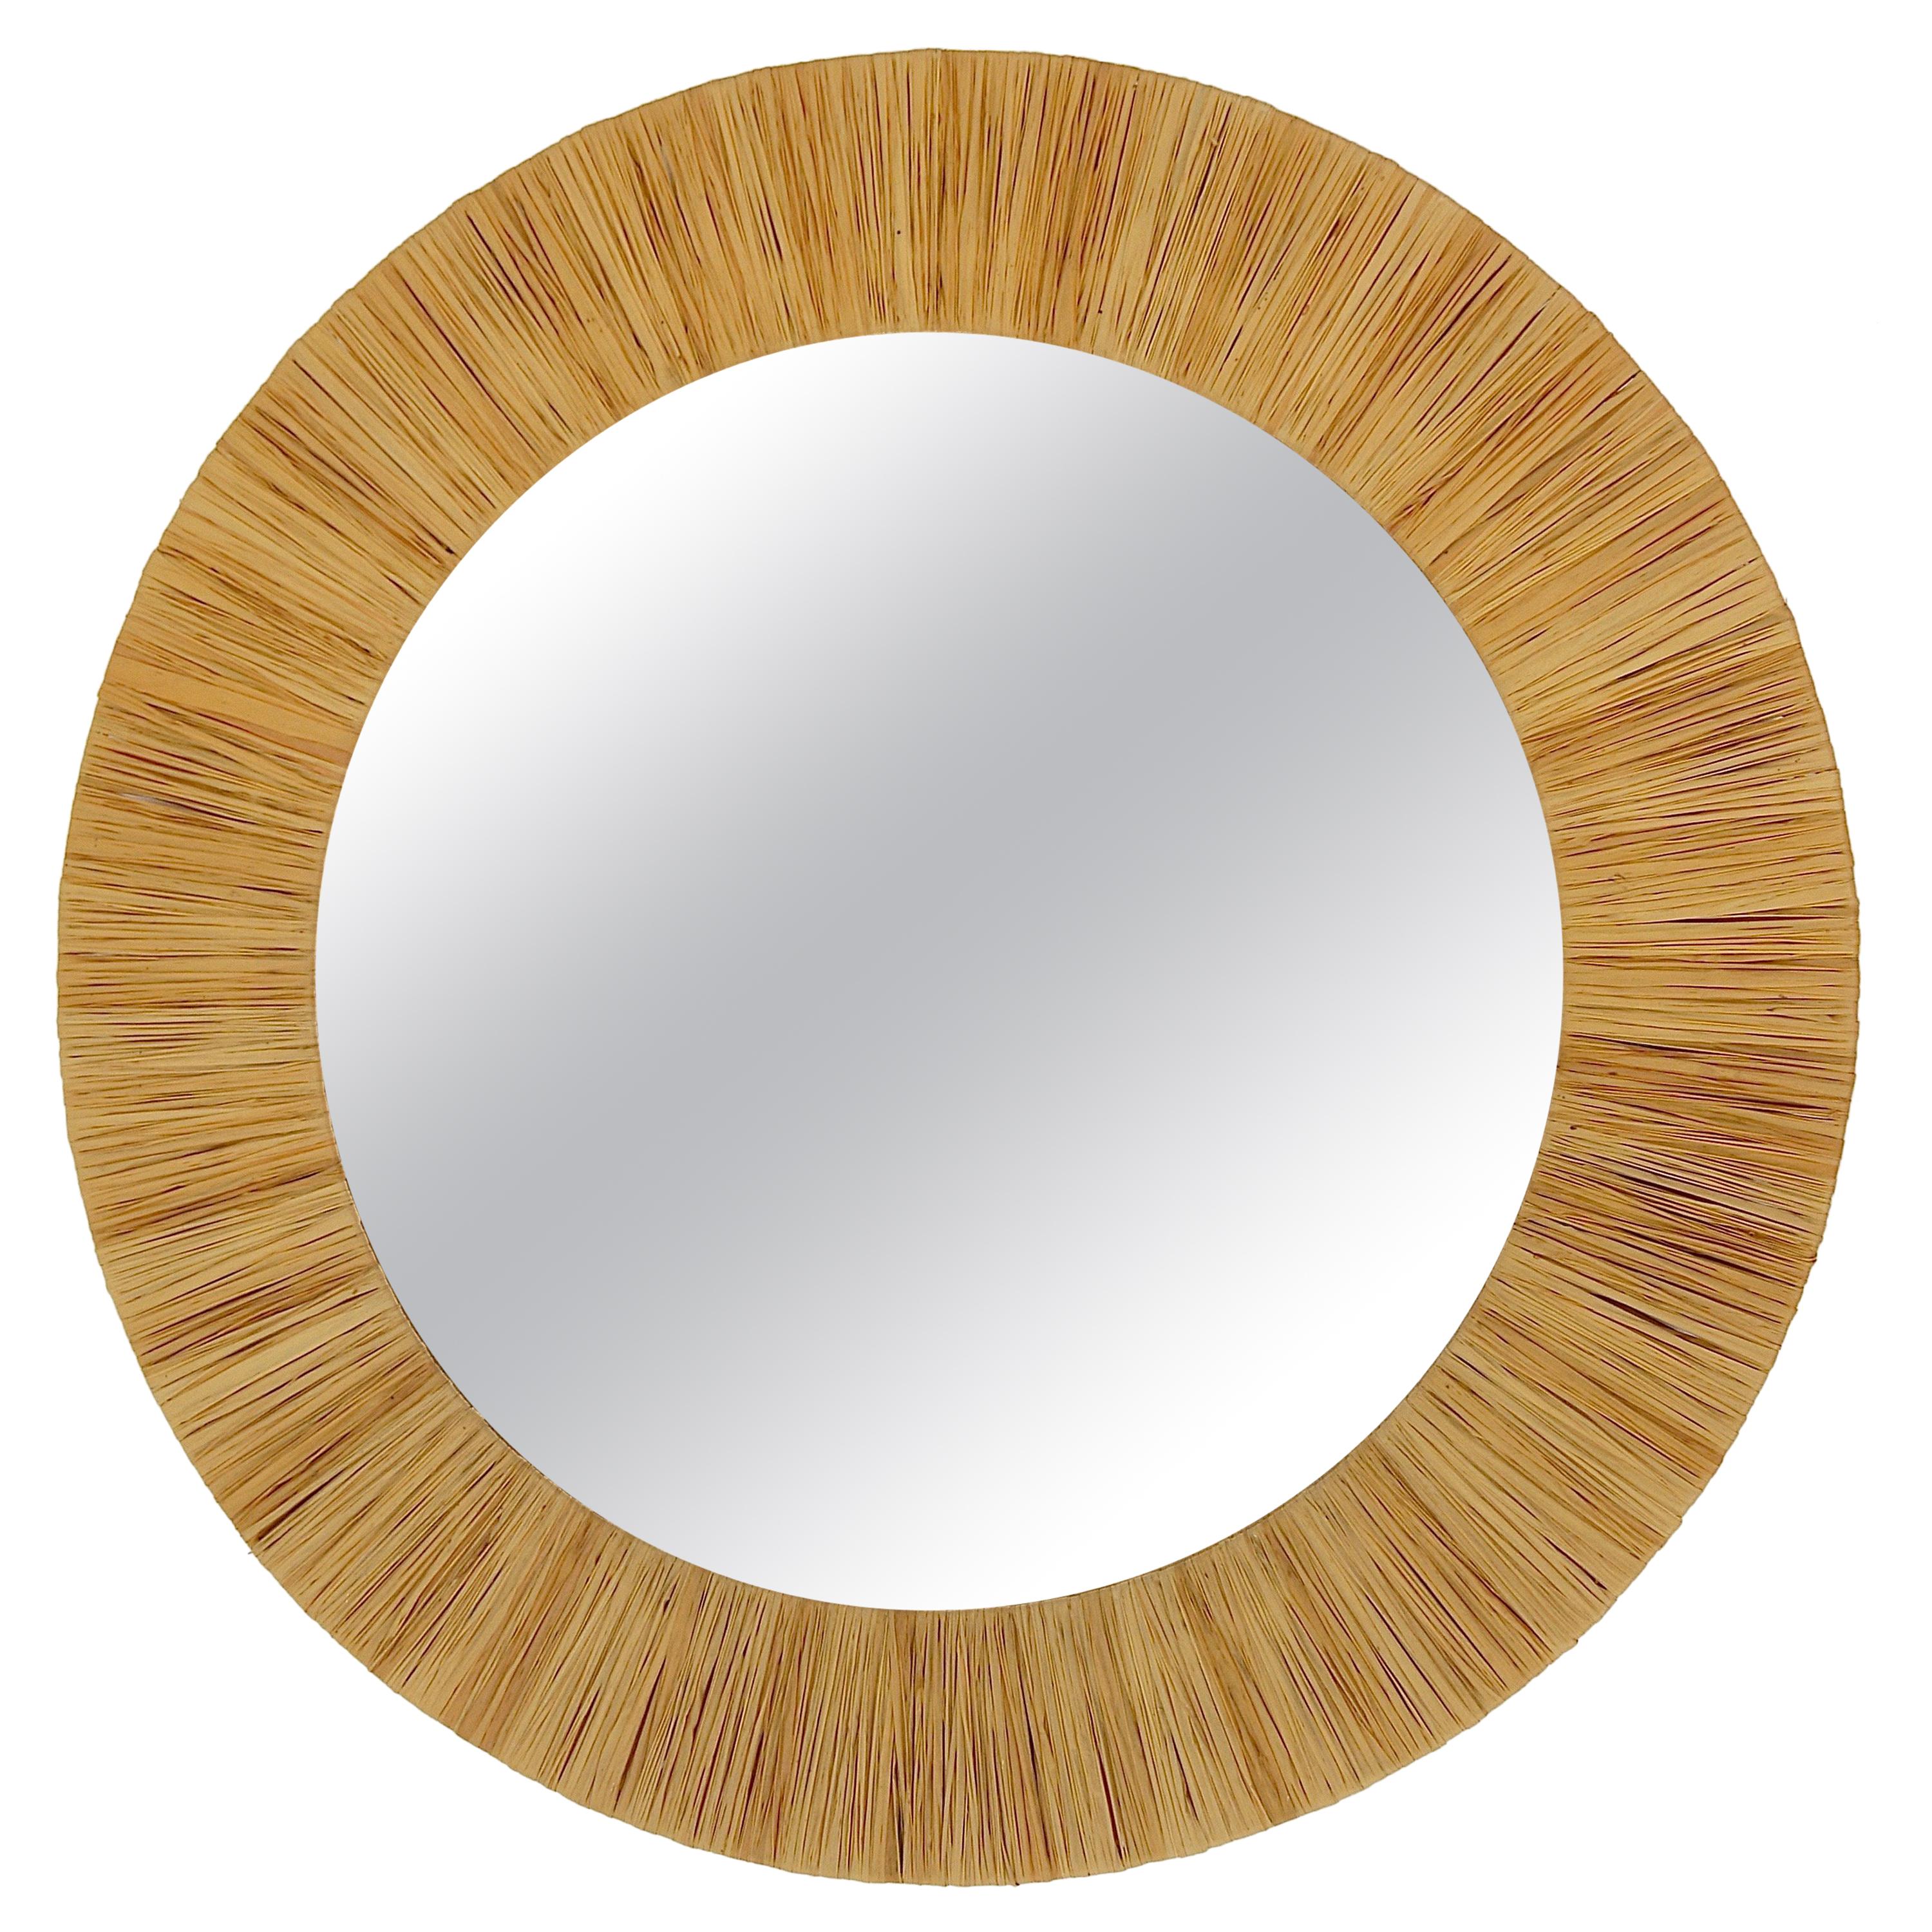 Beautiful Midcentury Round Wall Mirror With Raffia Bast Frame, France, 1950s